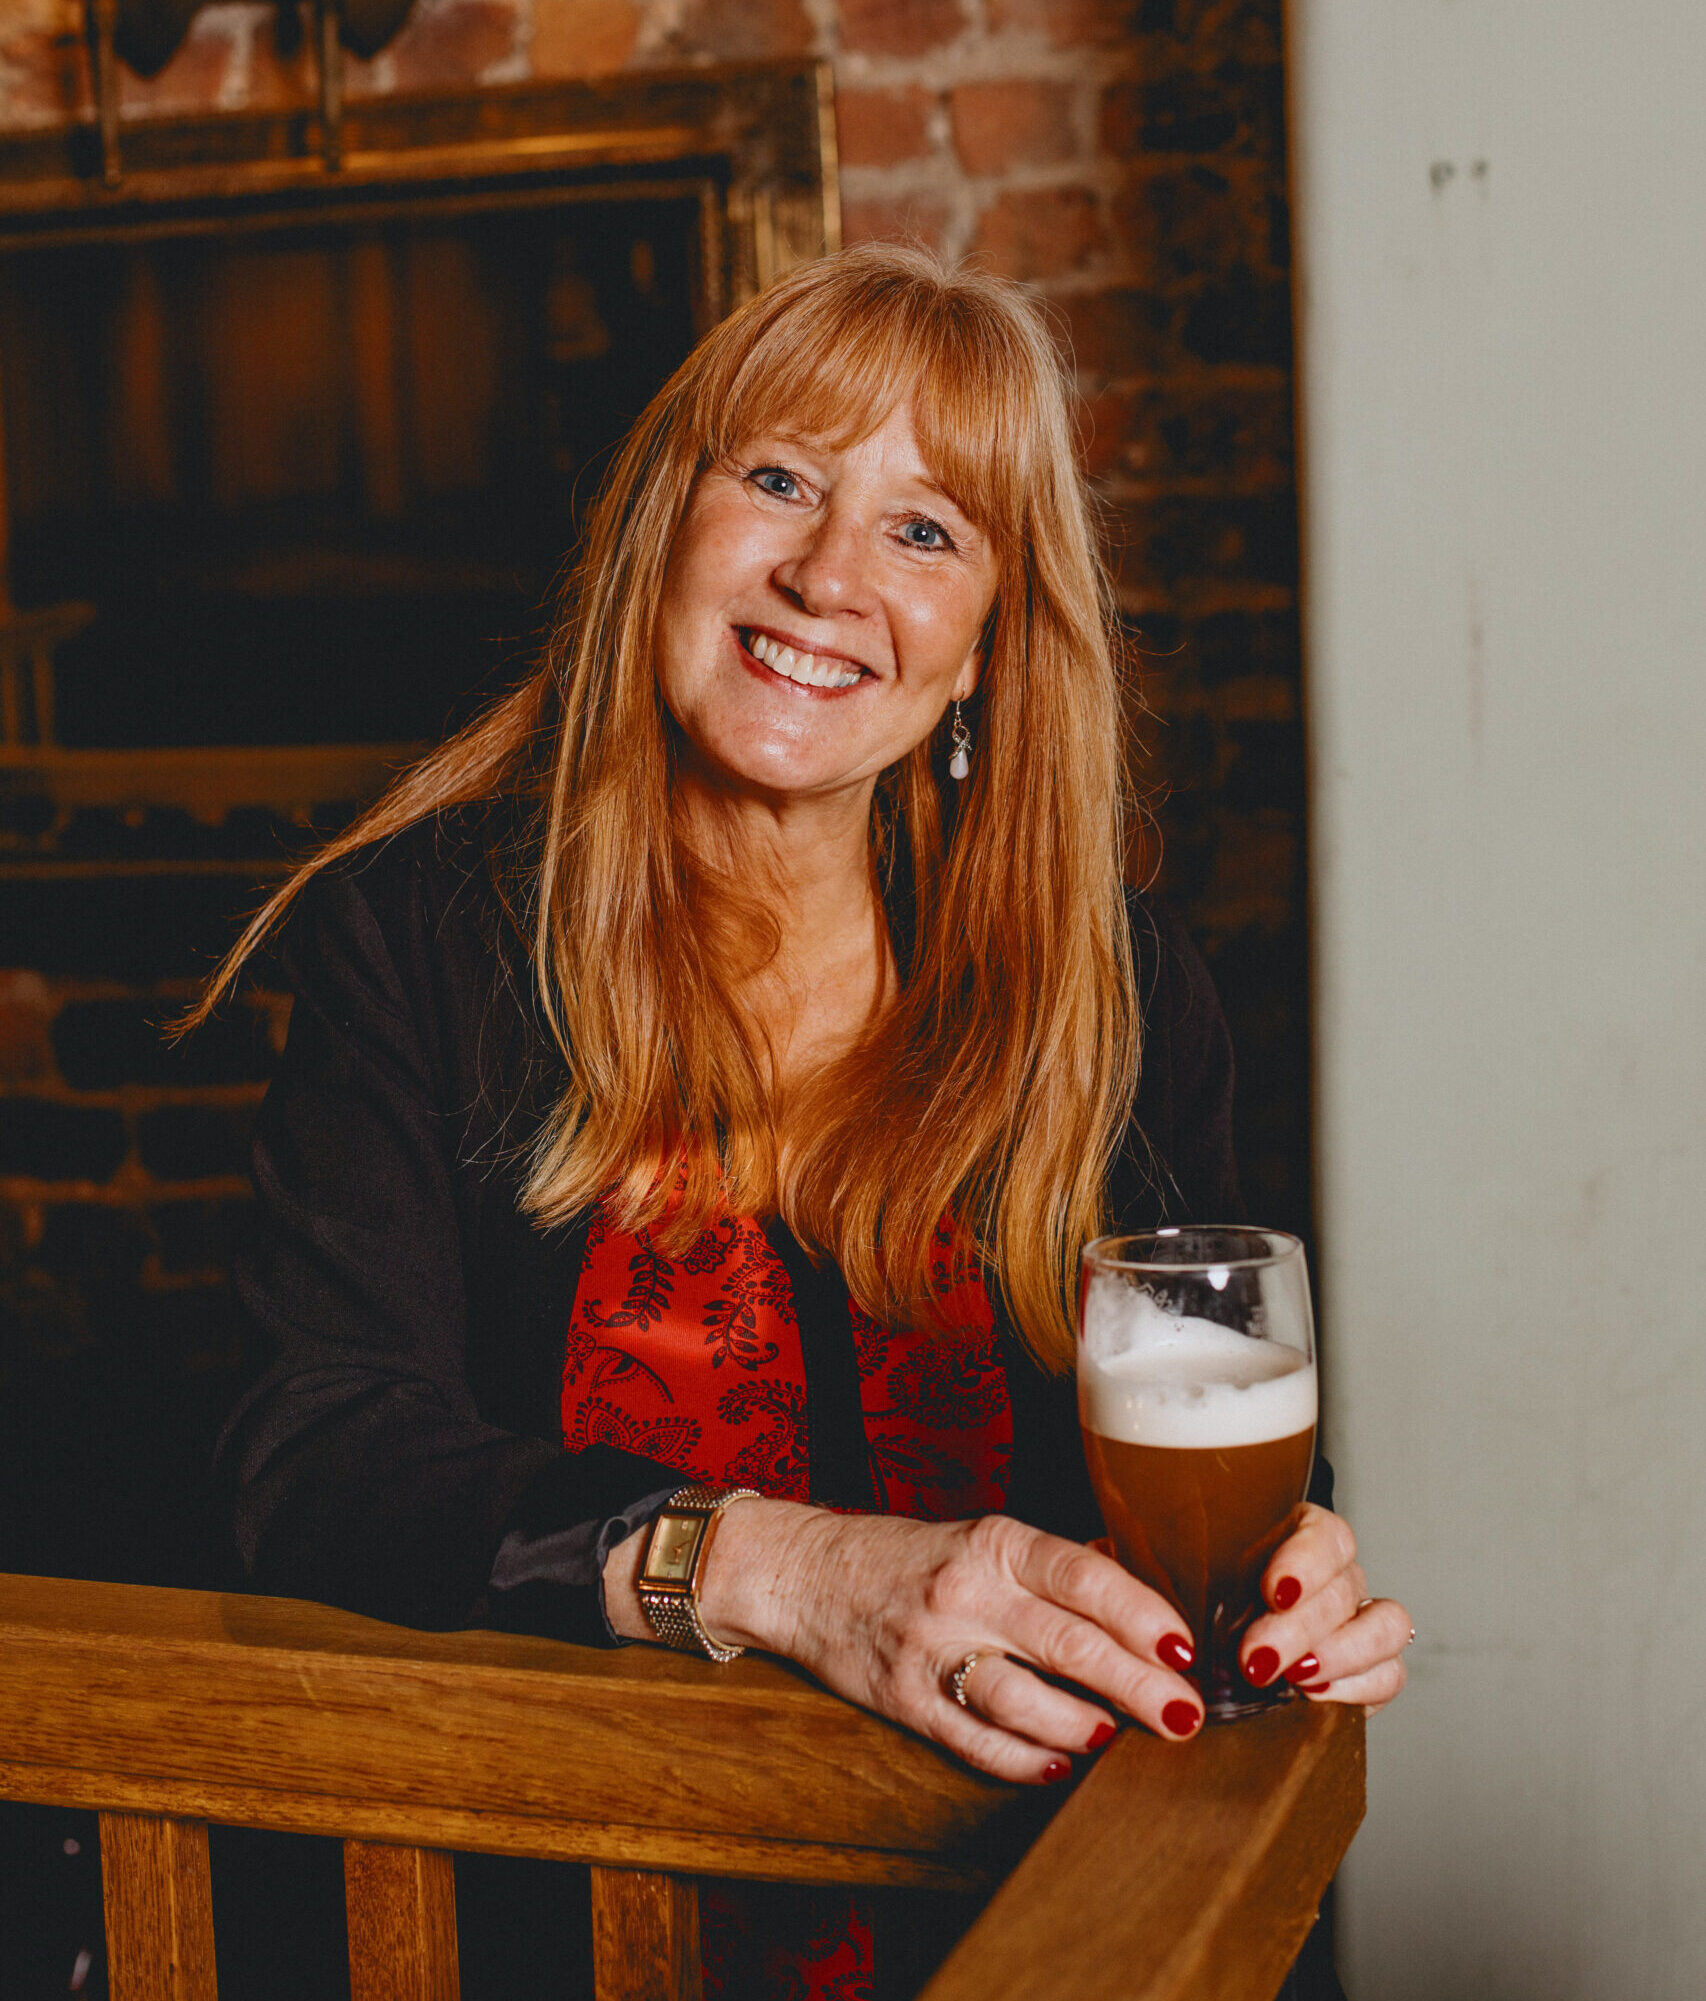 A woman smiling holding a pint of Bitter.